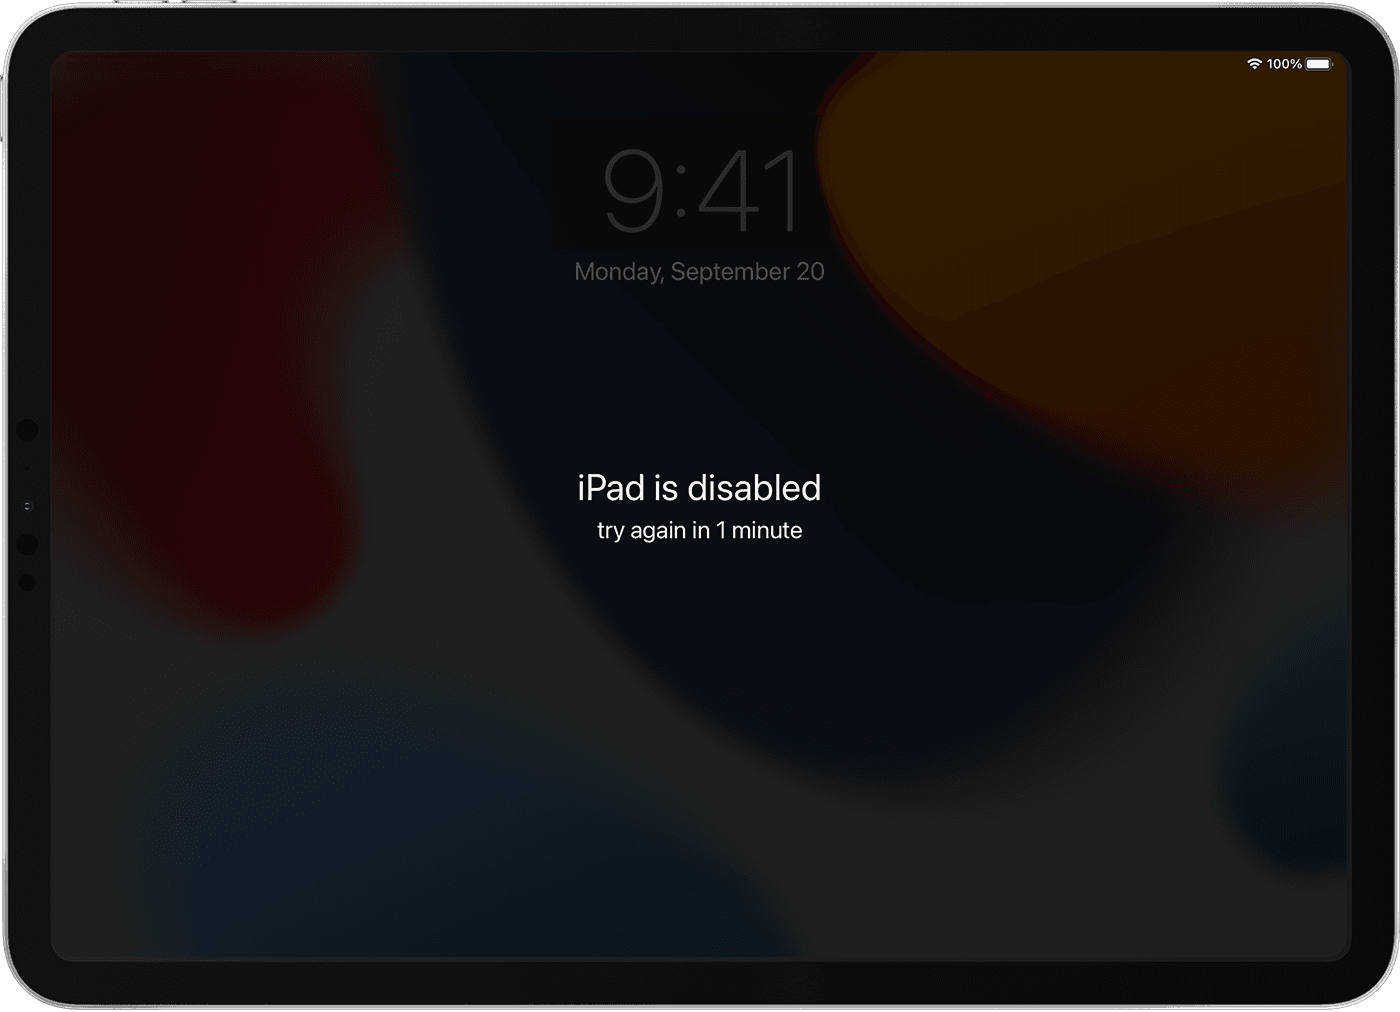 ipad is disabled message showing on ipad